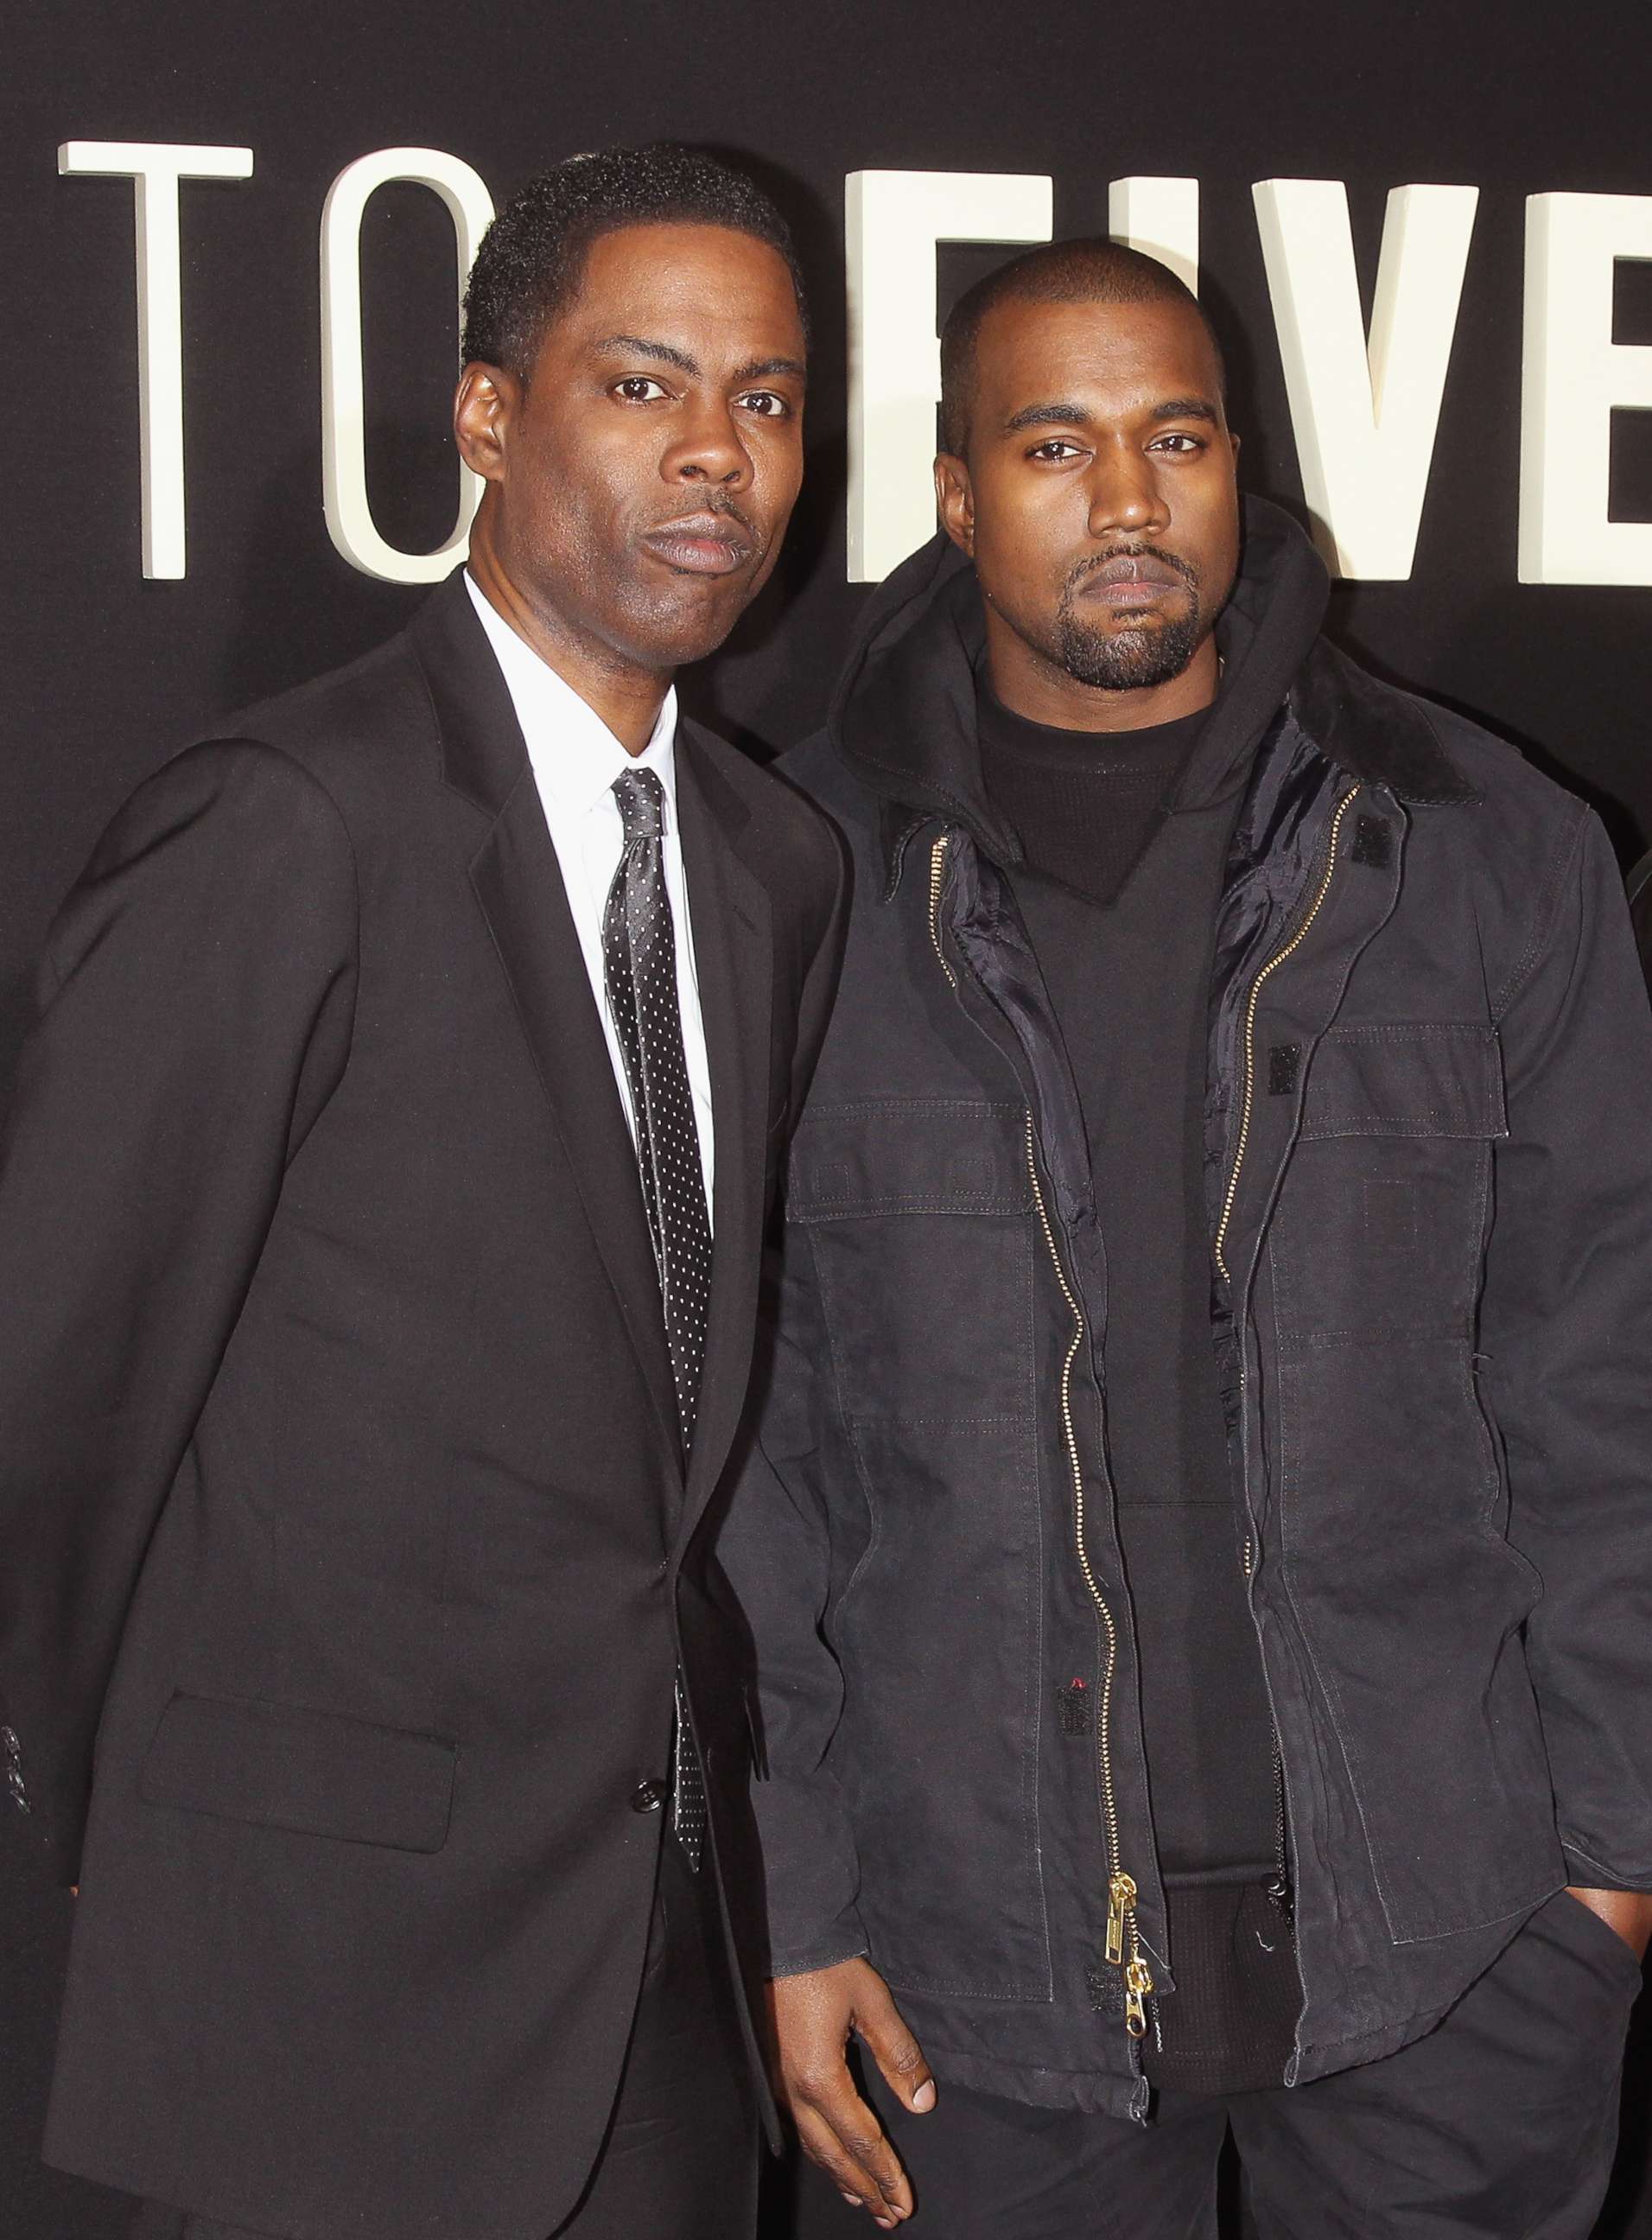 PHOTO: Chris Rock and Kanye West attend the "Top Five" New York premiere at Ziegfeld Theater on Dec. 3, 2014 in New York.